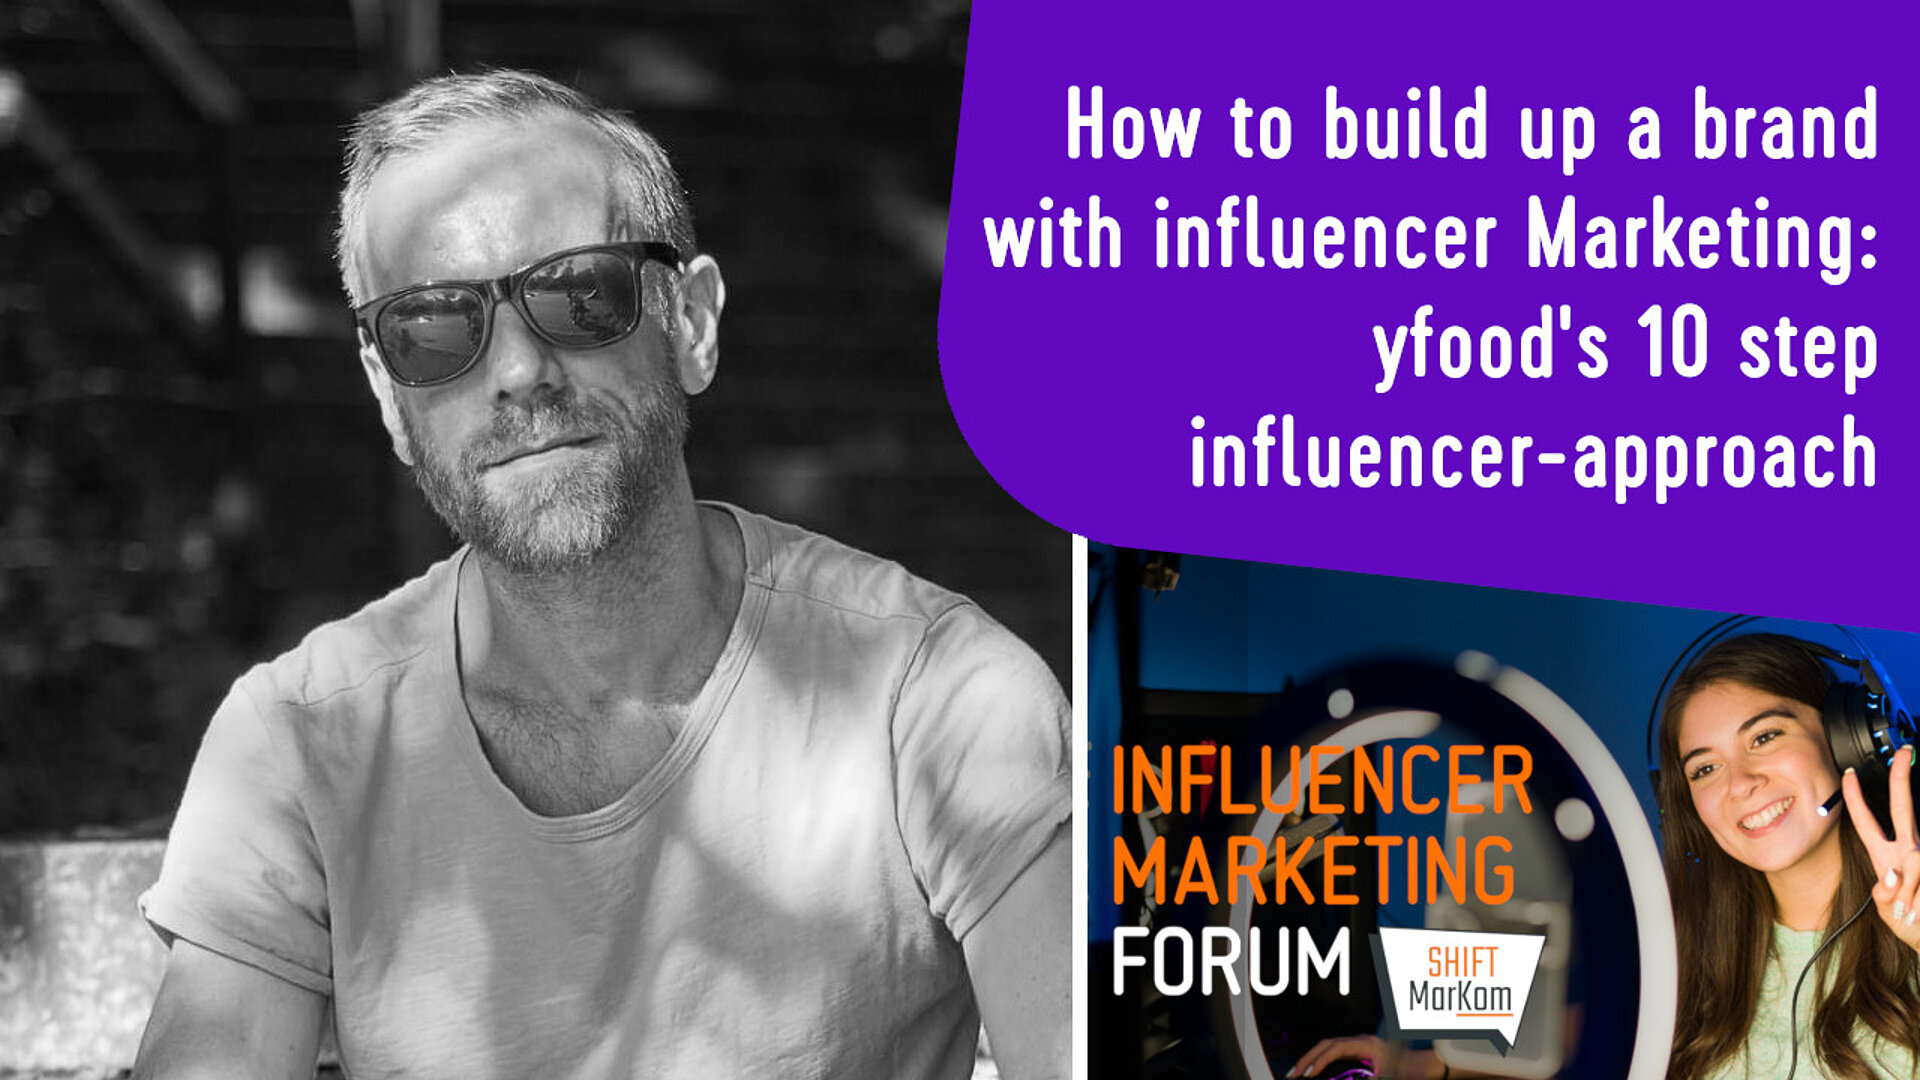 How to build up a brand with influencer Marketing: yfood's 10 step-influencer-approach